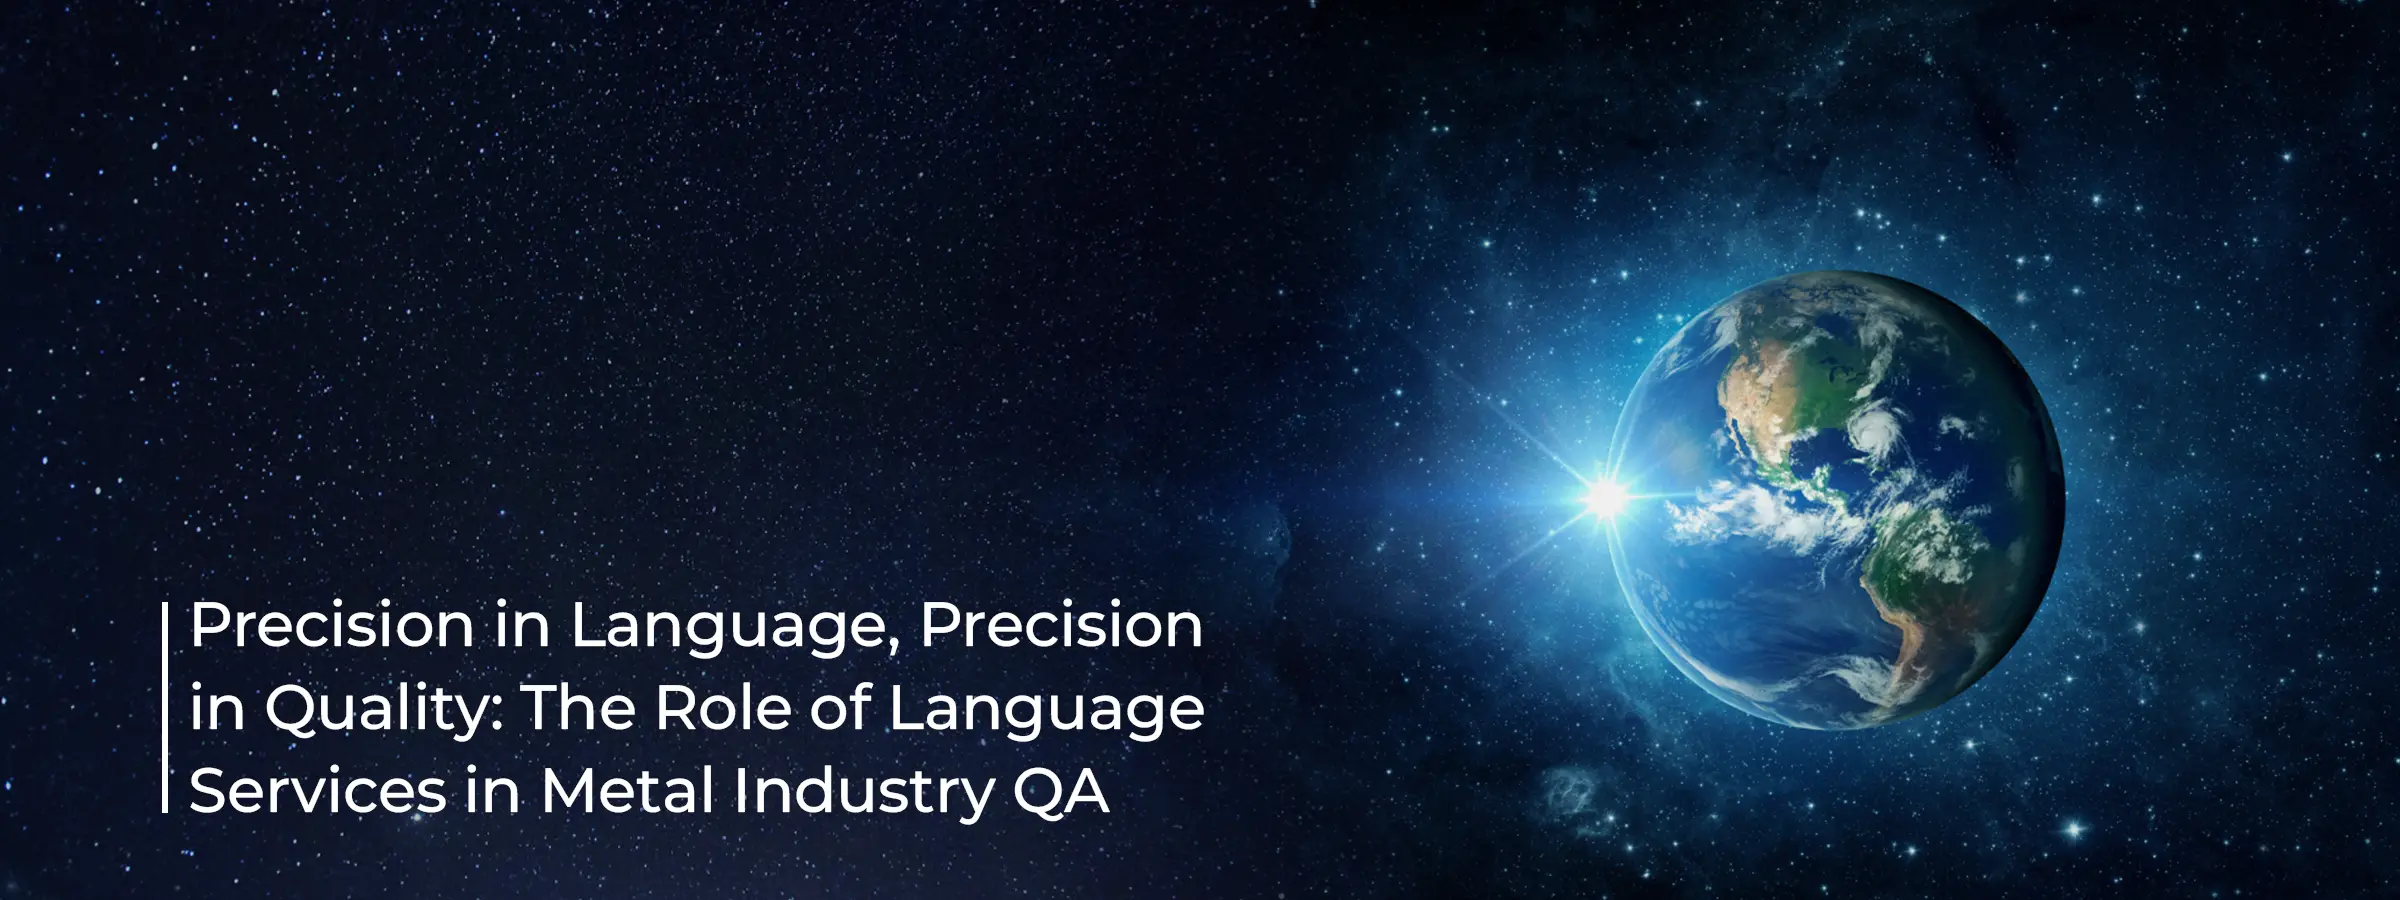 precision-in-language-precision-in-quality-the-role-of-language-services-in-metal-industry-qa